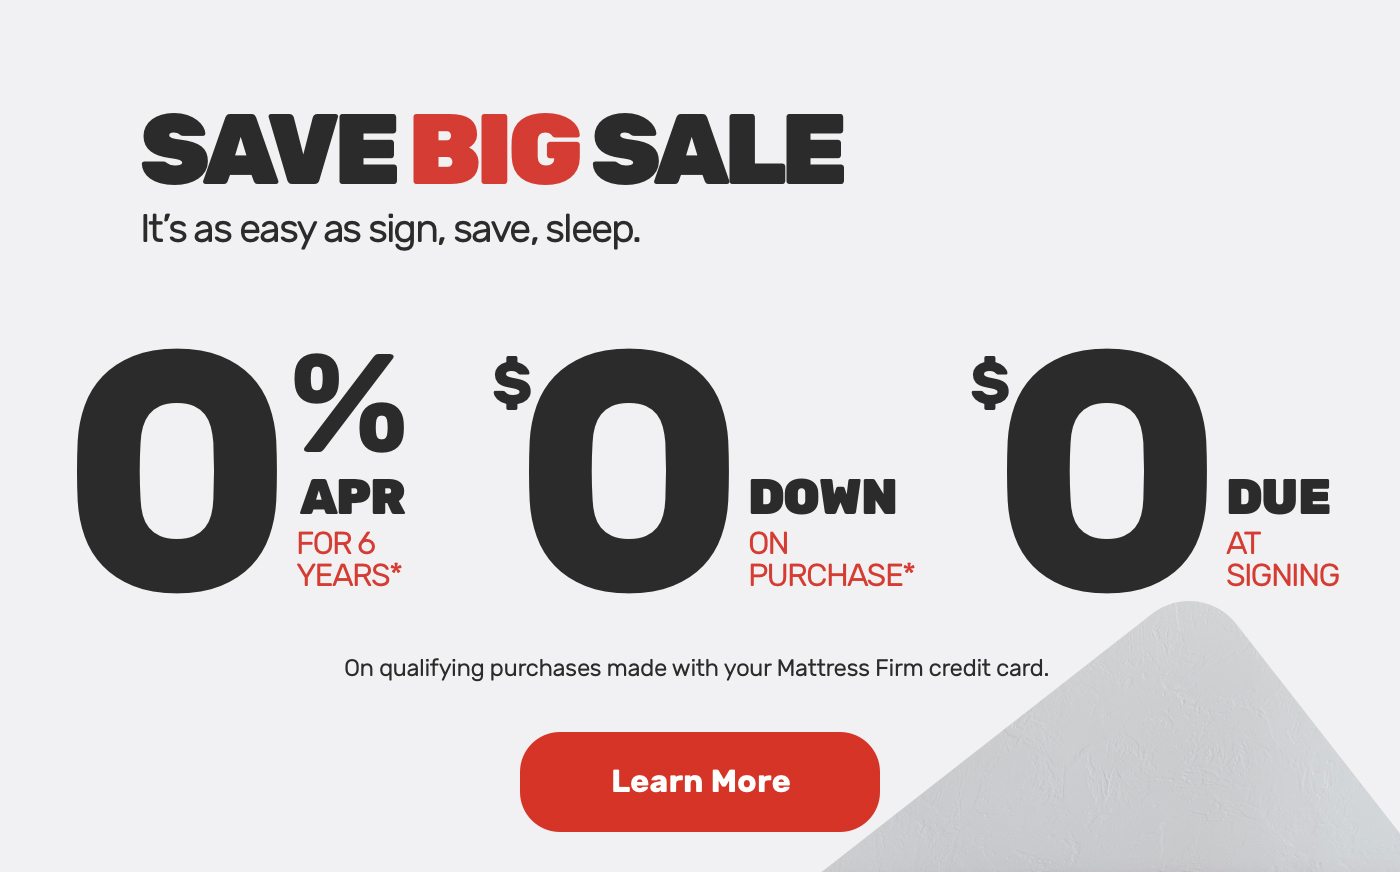 Save big sale. it's as easy as sign, save, sleep. Learn more.